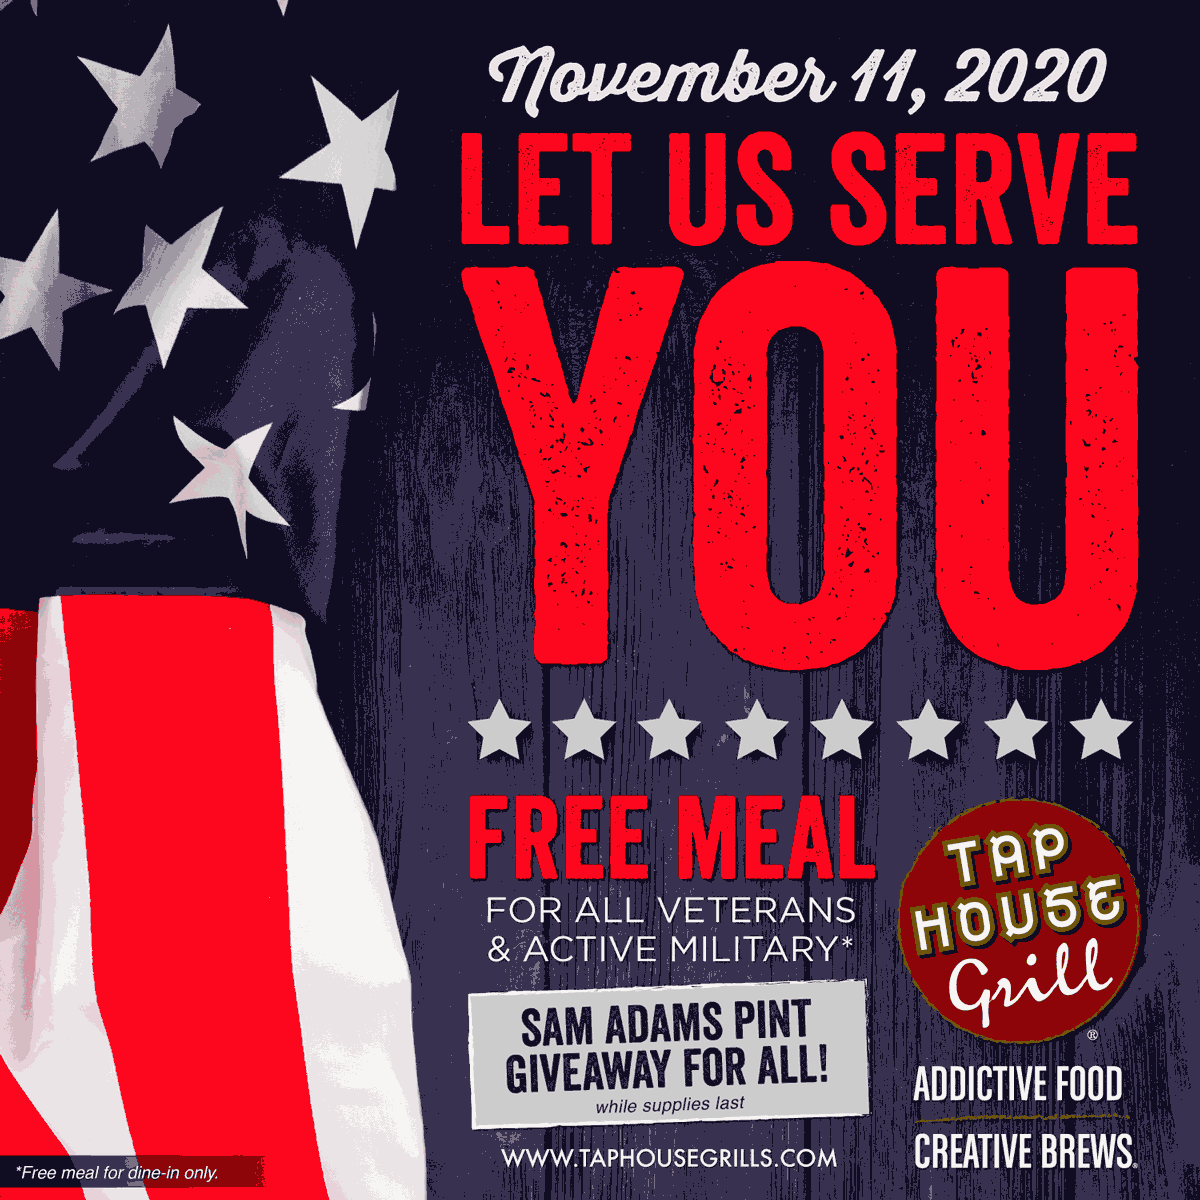 Tap House Grill restaurants Coupon  Free pint for everyone + free meal for military today at Tap House Grill #taphousegrill 